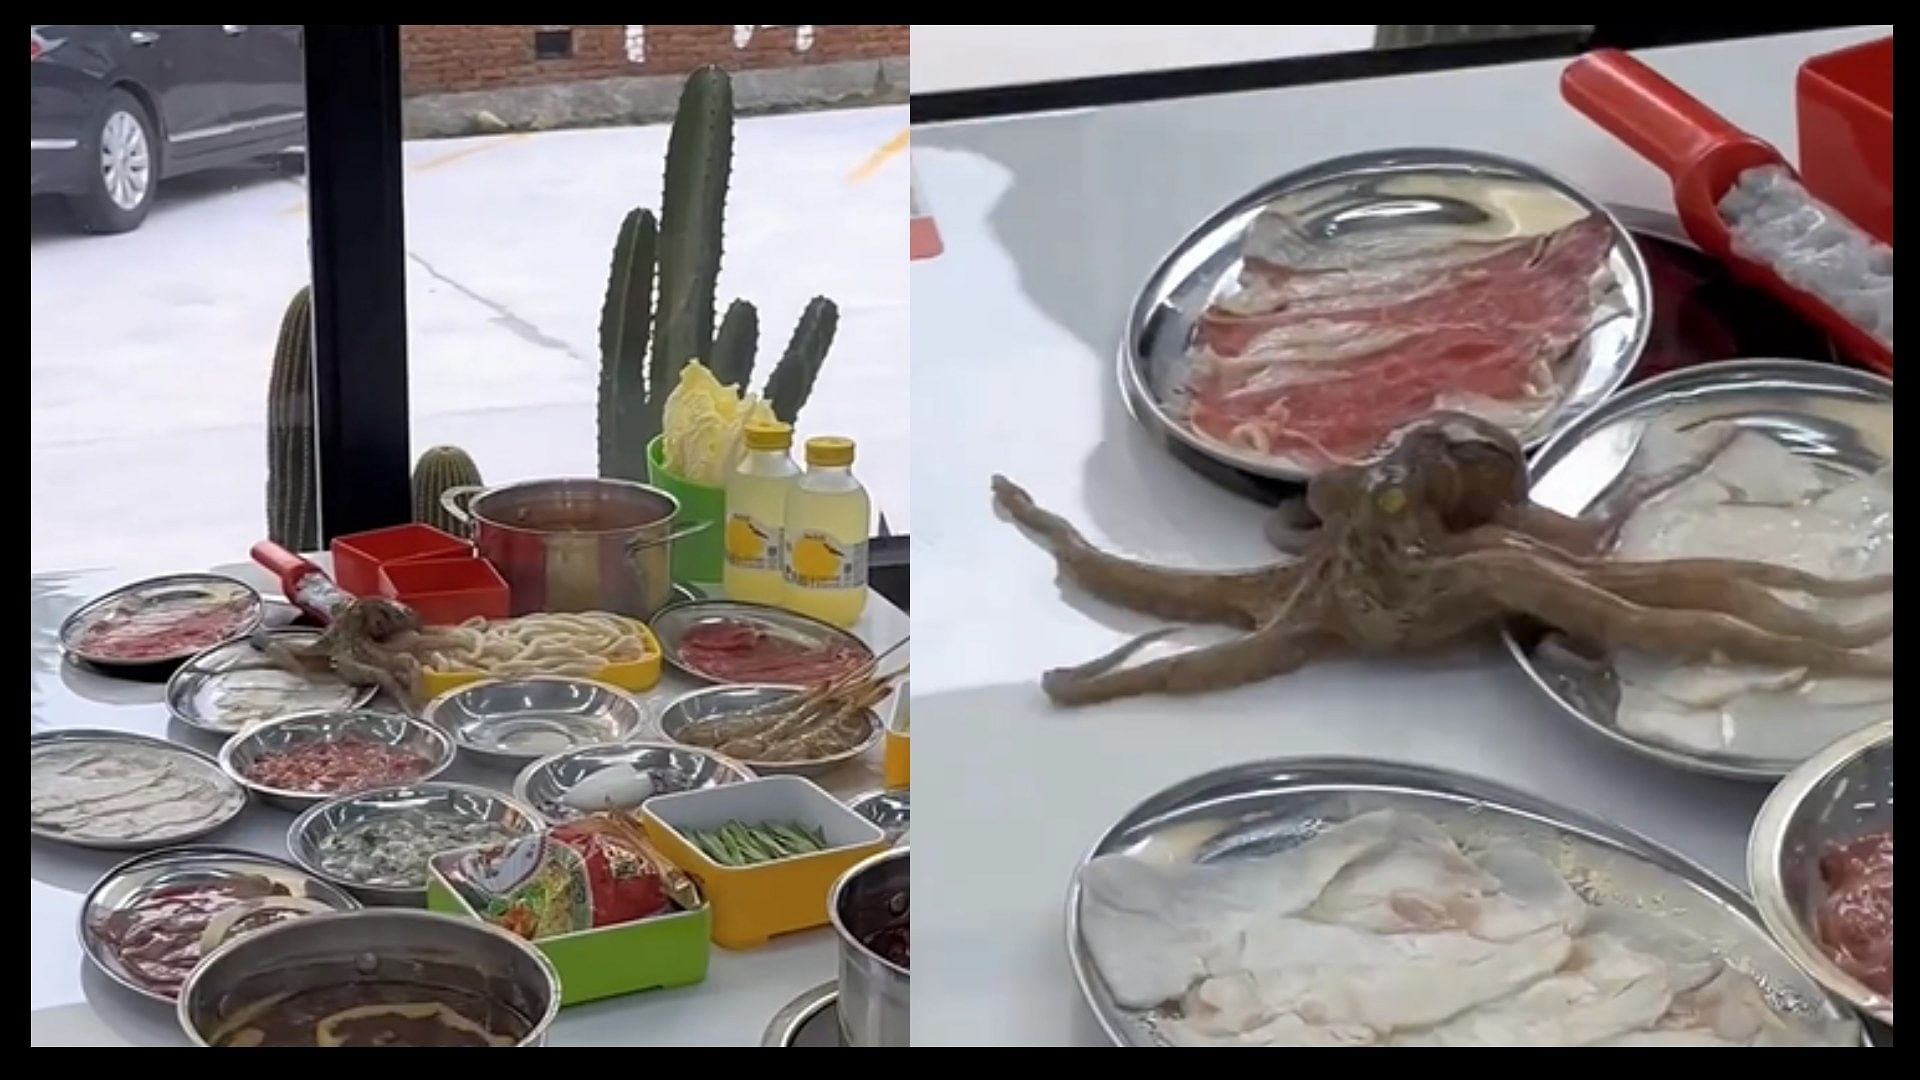 Octopus runs away from plate served for eating shocking video viral on social media